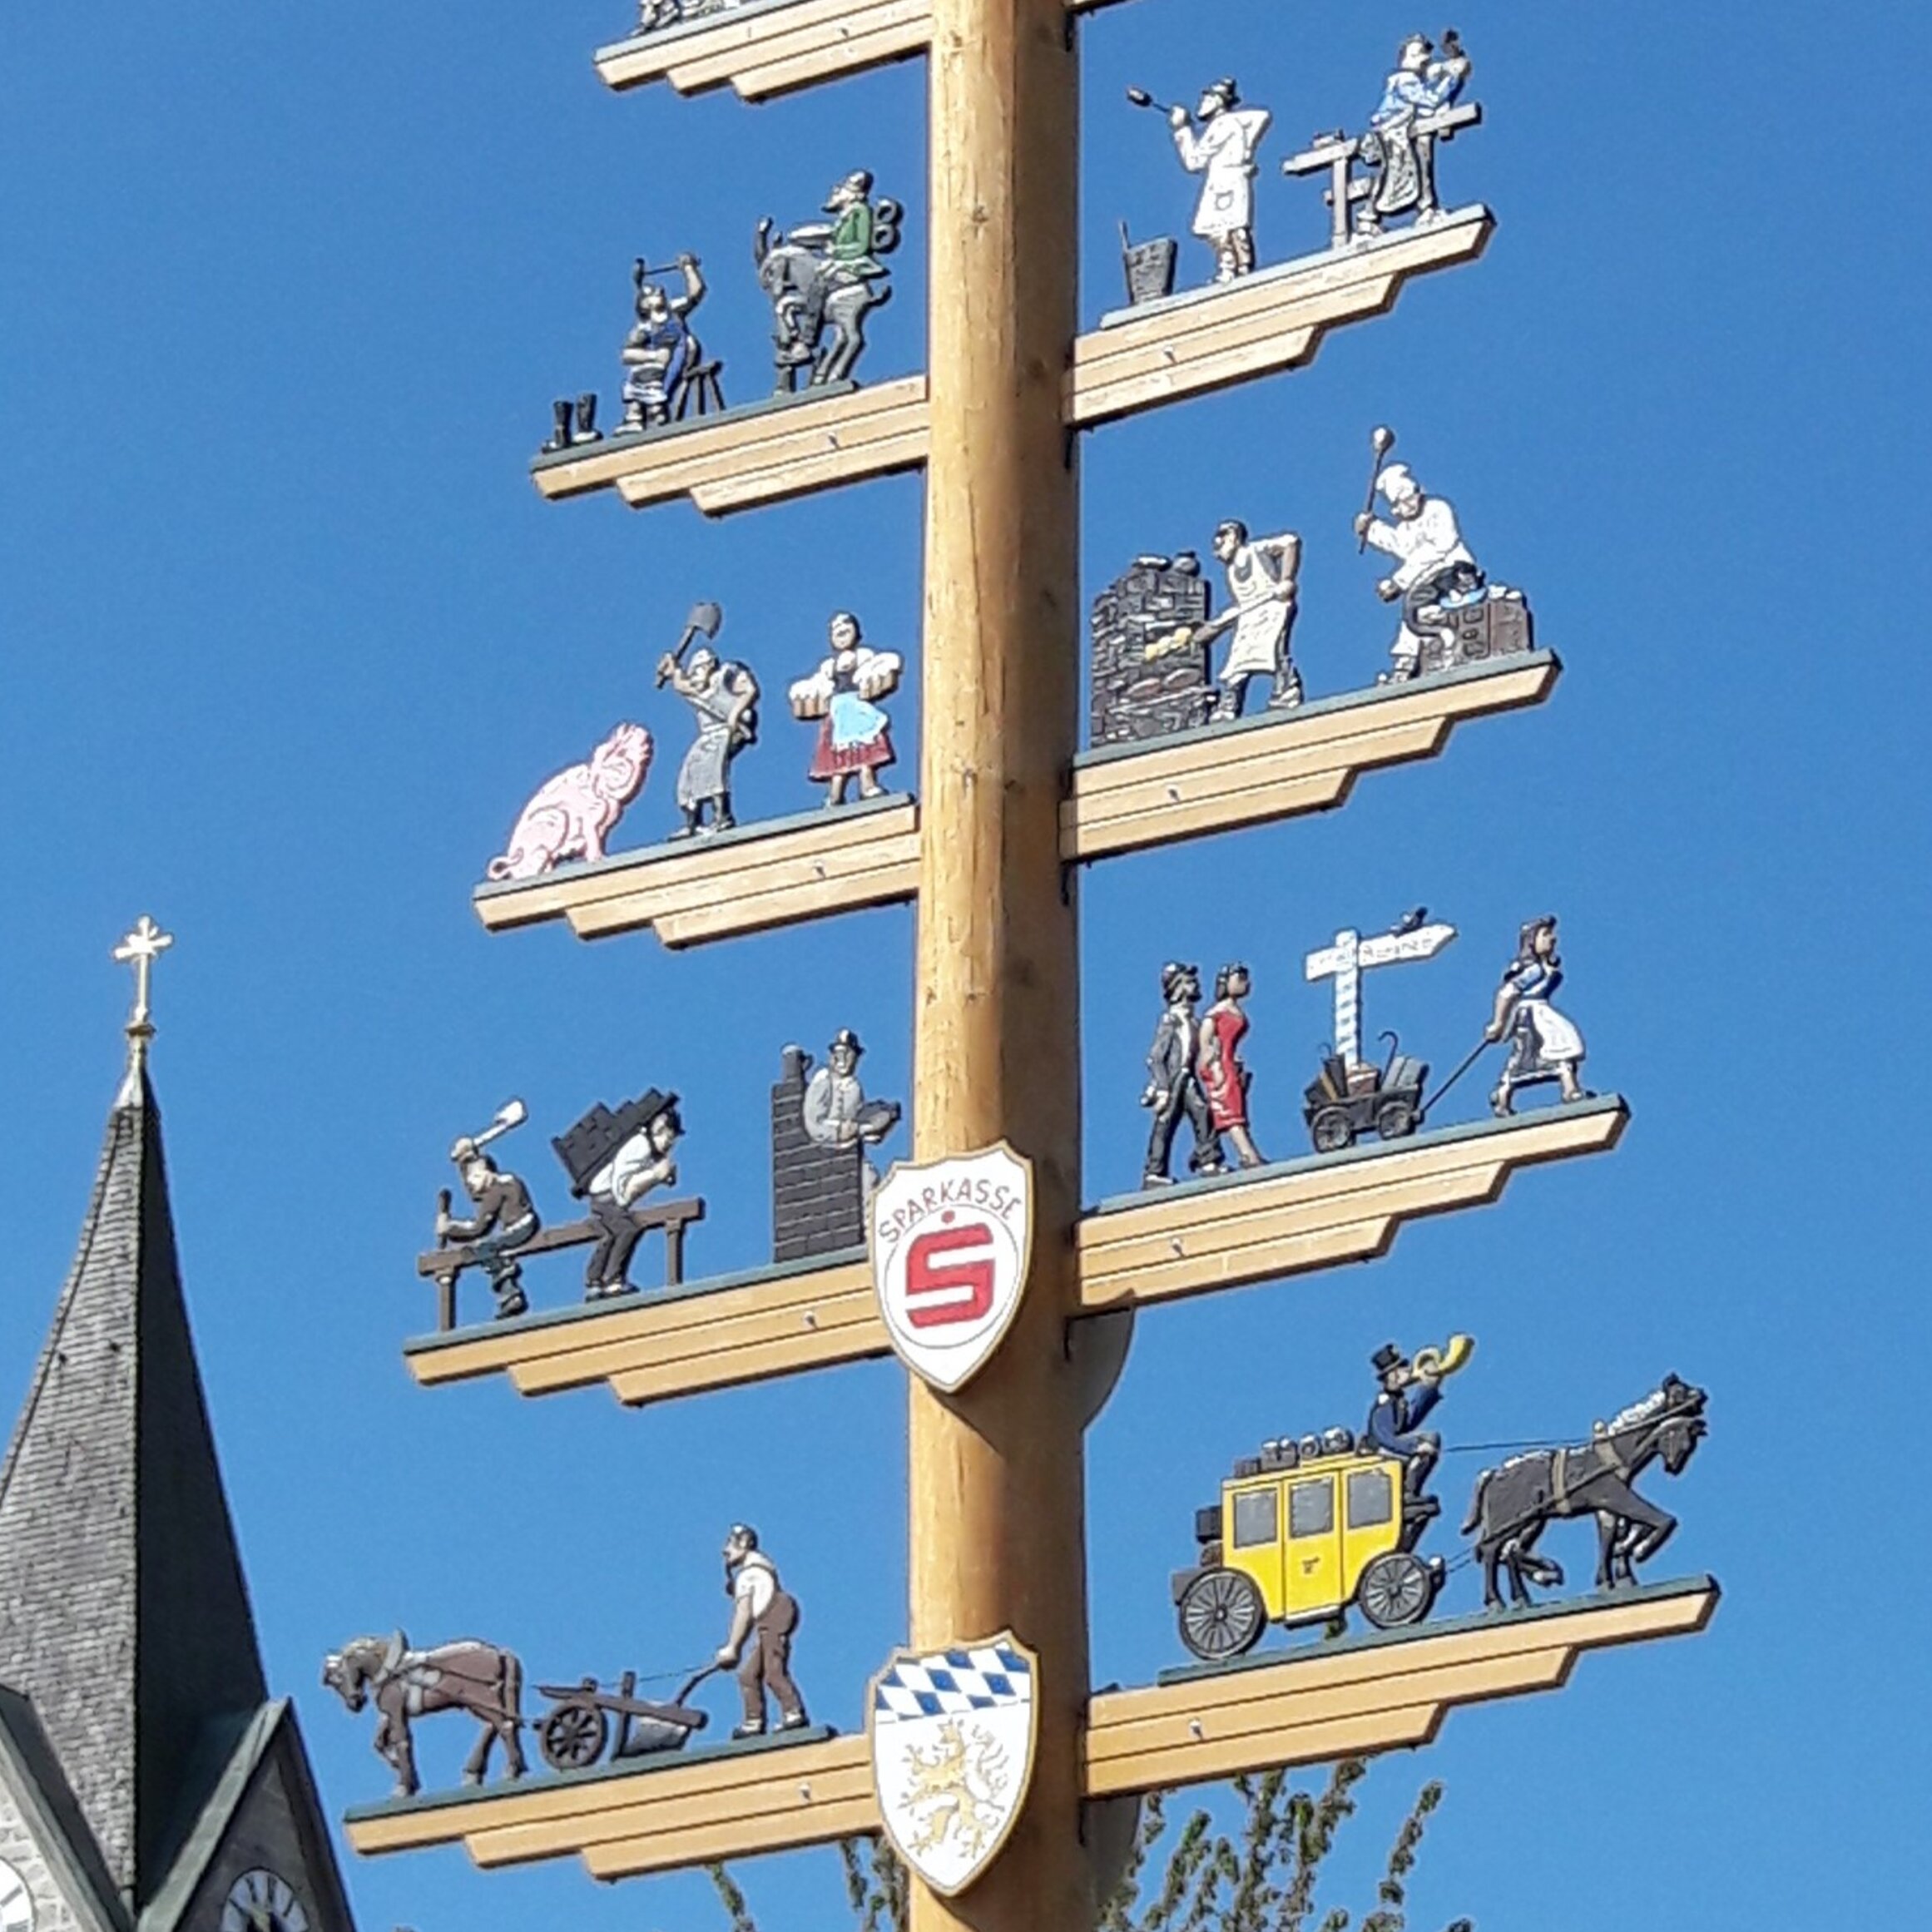 Maibaumfest in Seebruck